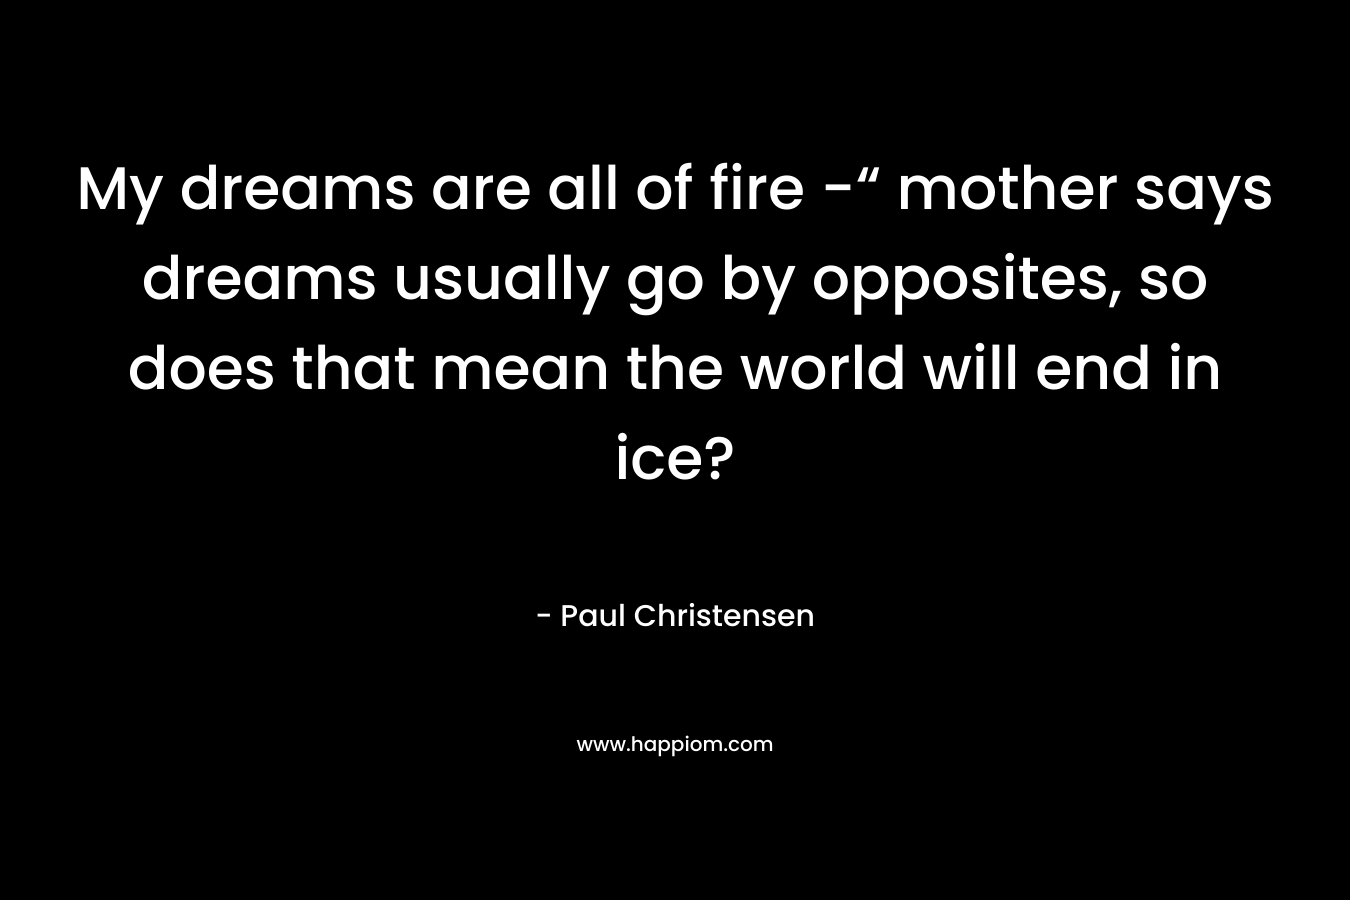 My dreams are all of fire -“ mother says dreams usually go by opposites, so does that mean the world will end in ice? – Paul Christensen